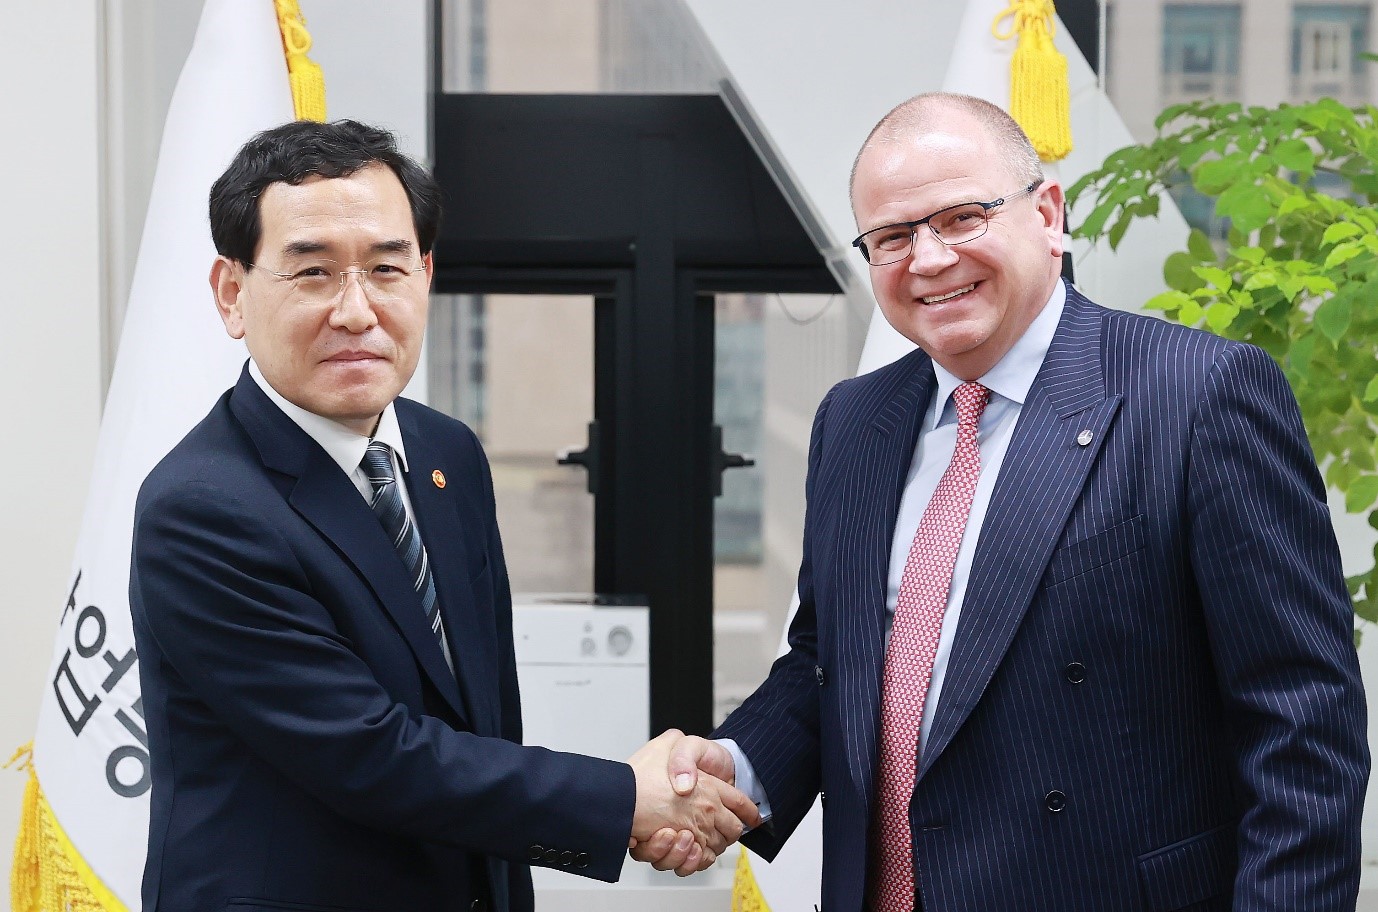 Minister Lee and Denmark's Vestas CEO discuss investment